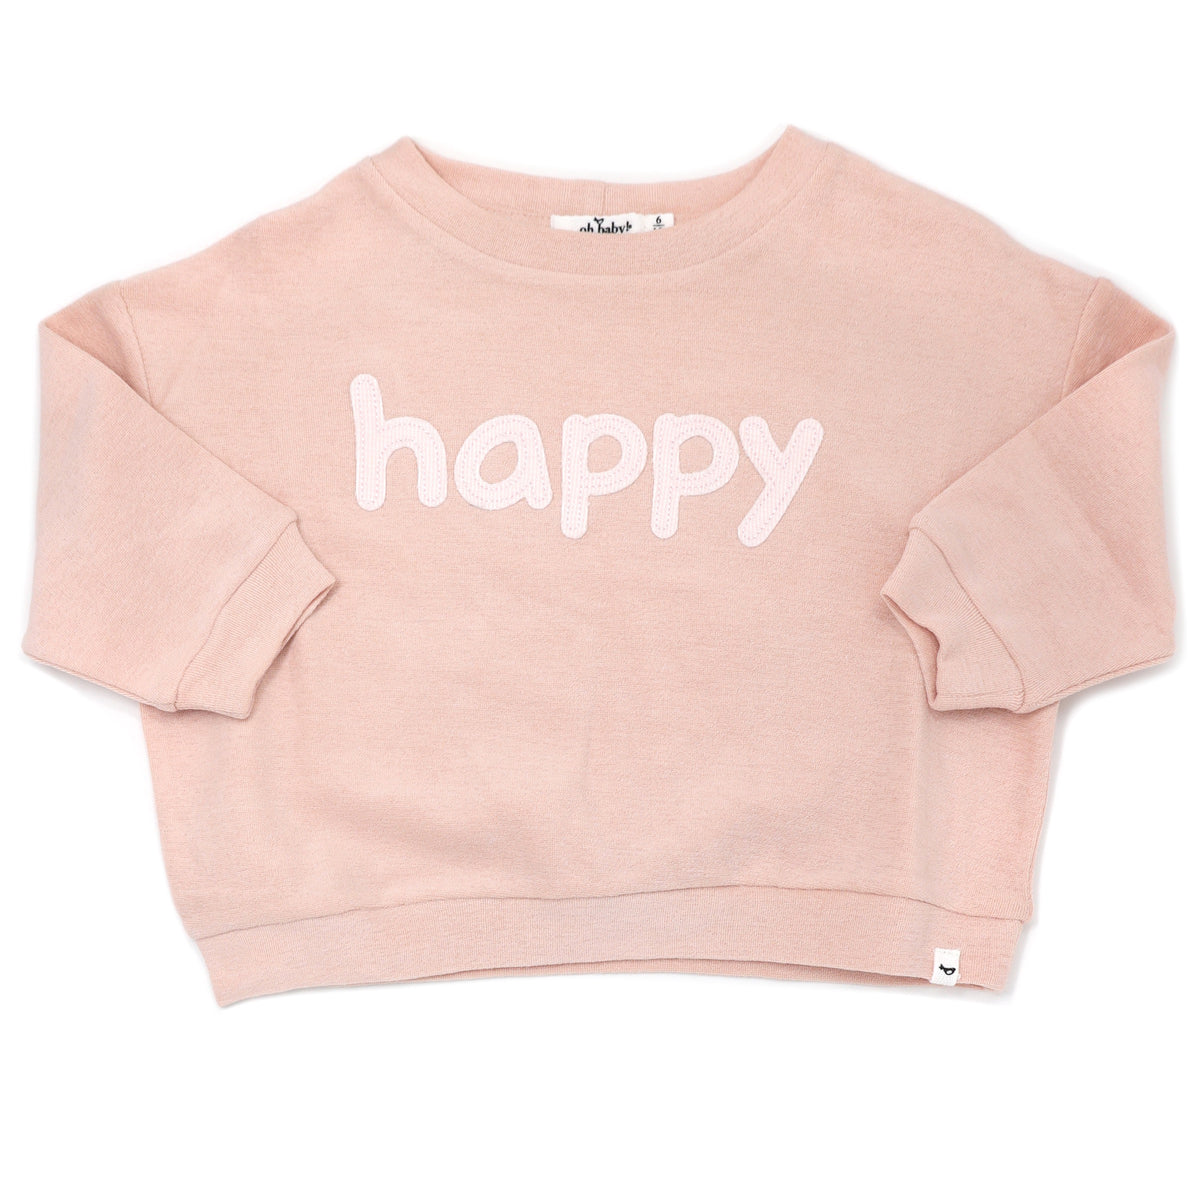 oh baby! Cotton Terry Slouch Boxy - "happy" Applique - Peachy